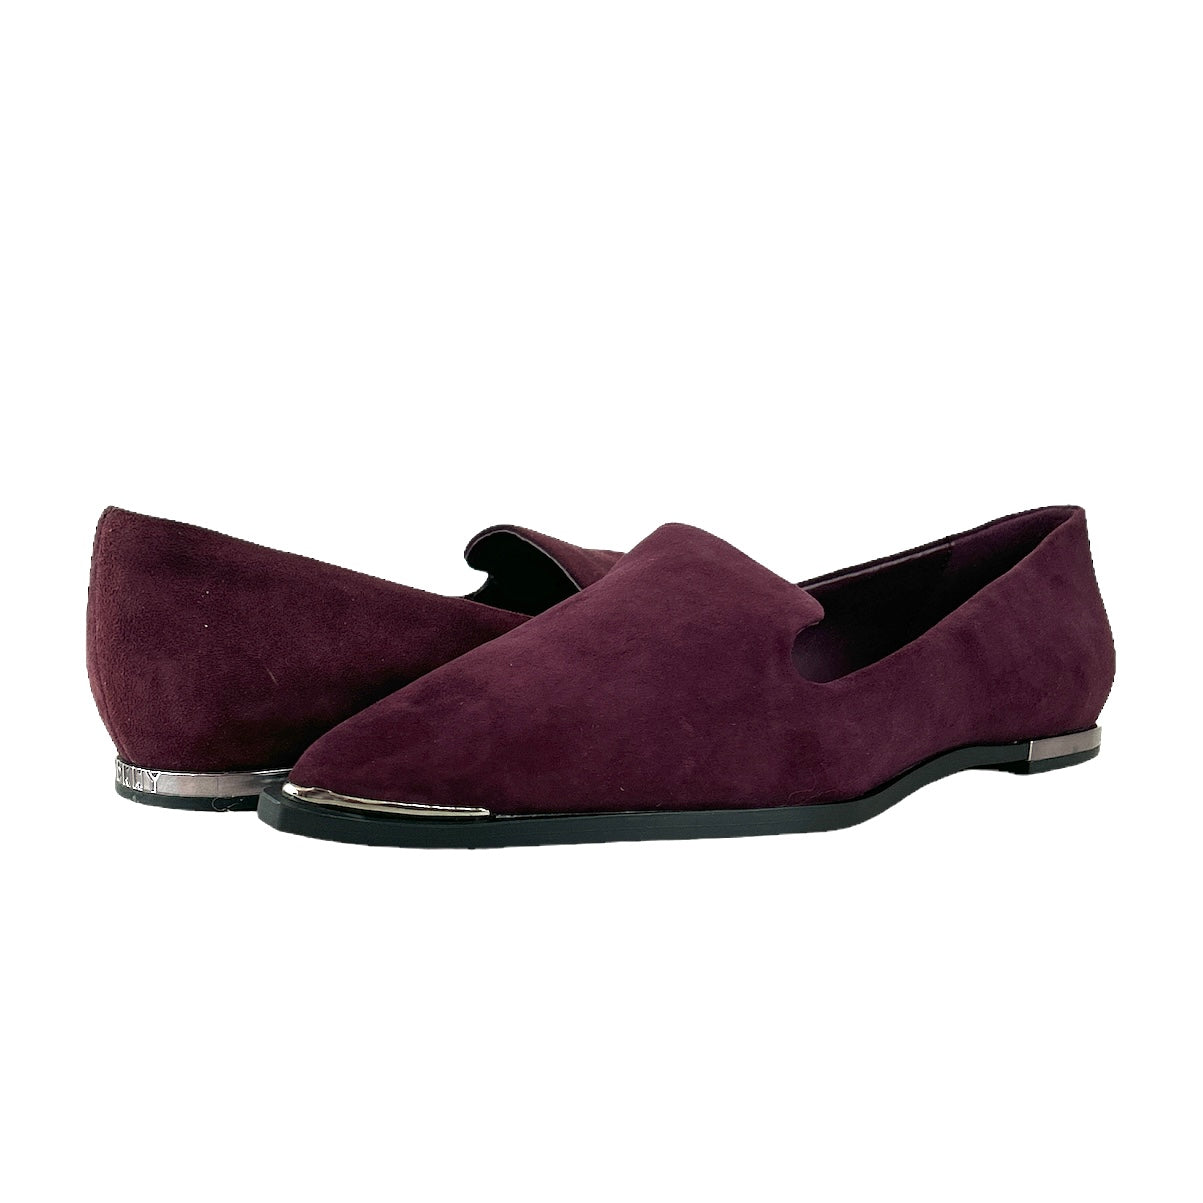 LONA Wine Red Comfort Slip-on Pointed Toe Flats Size 6 M Women's Loafers